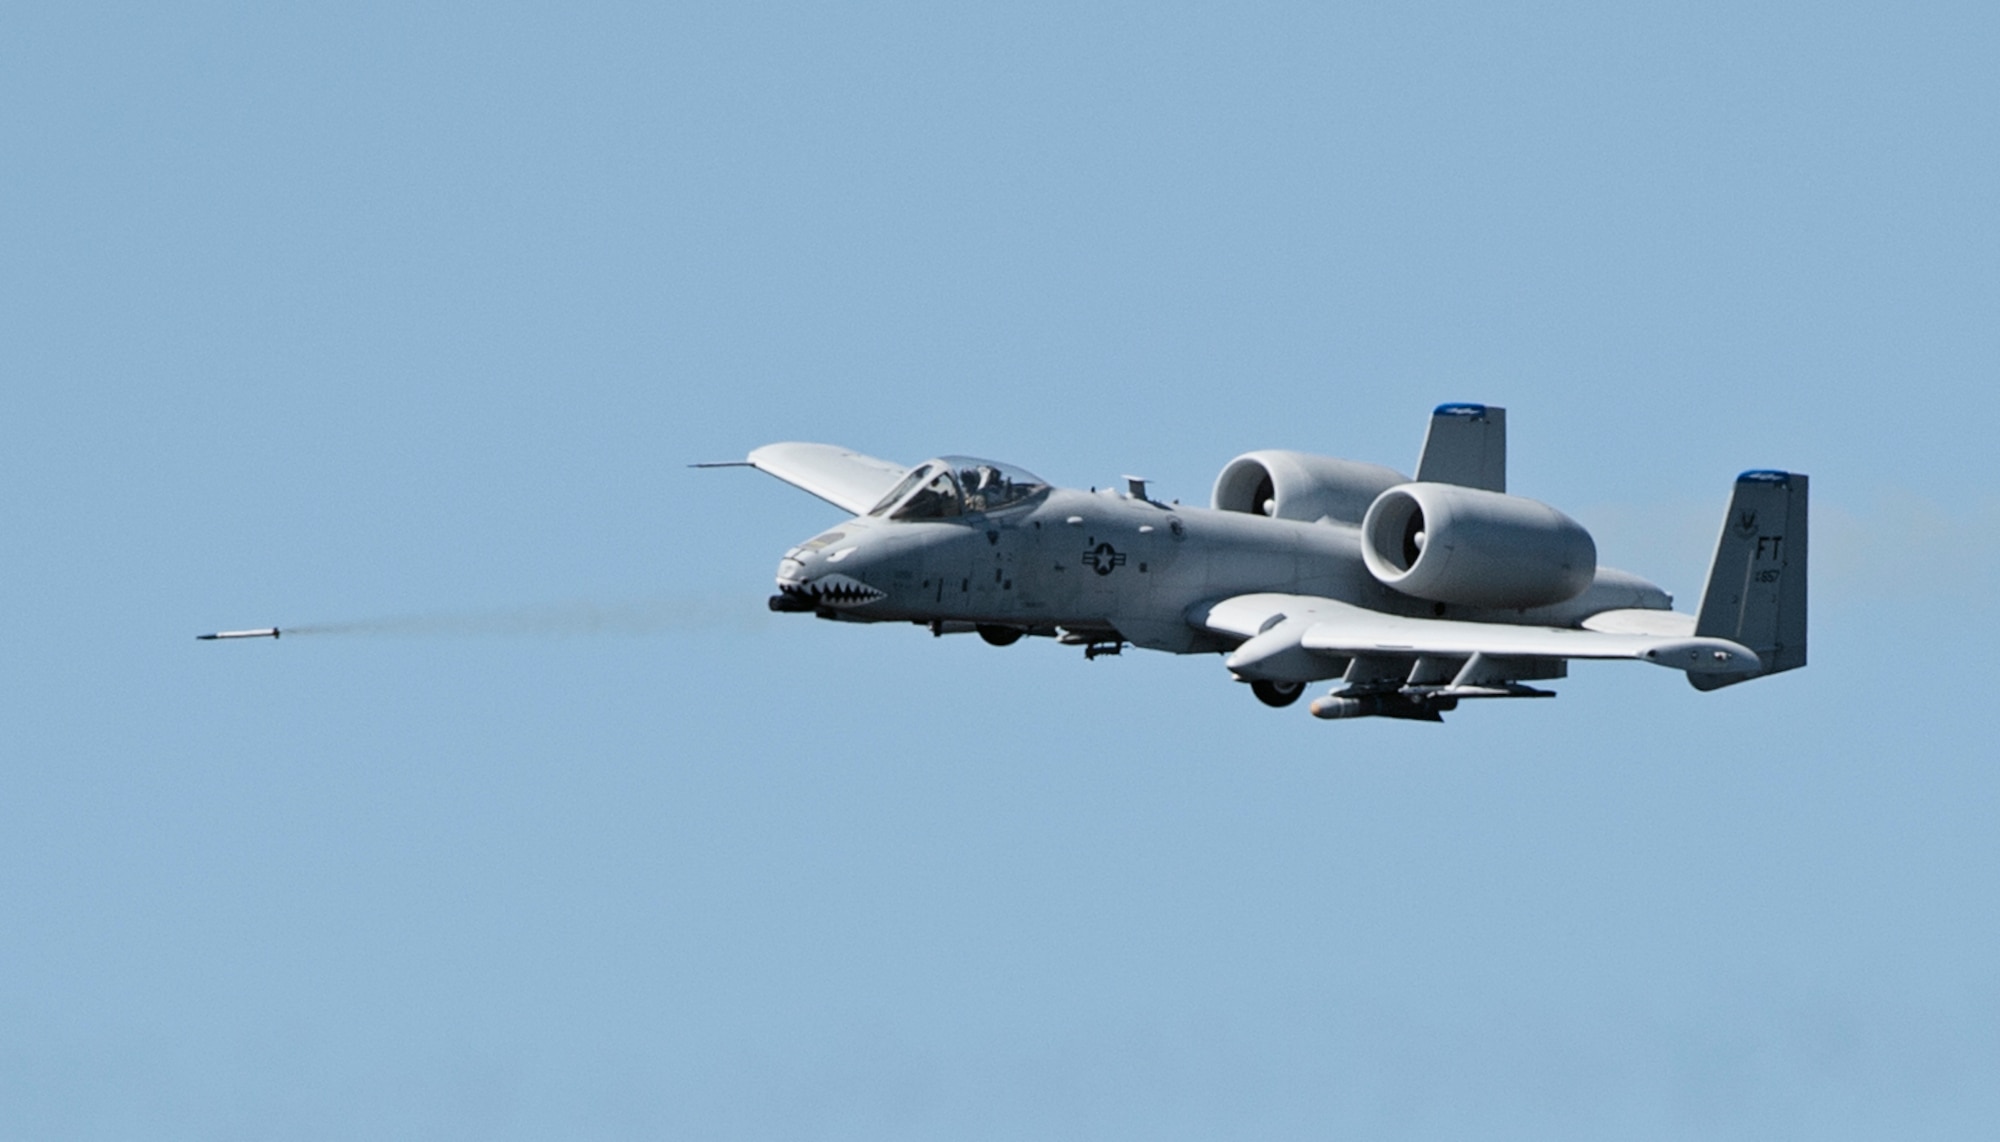 An A-10 Thunderbolt II fires an air-to-surface missile over the Grand Bay Bombing and Gunnery Range at Moody Air Force Base, Ga., Feb. 11, 2016. Multiple U.S. Air Force aircraft within Air Combat Command conducted joint aerial training that showcased the aircrafts tactical air and ground maneuvers, as well as its weapons capabilities. (U.S. Air Force photo by Staff Sgt. Brian J. Valencia/Released)